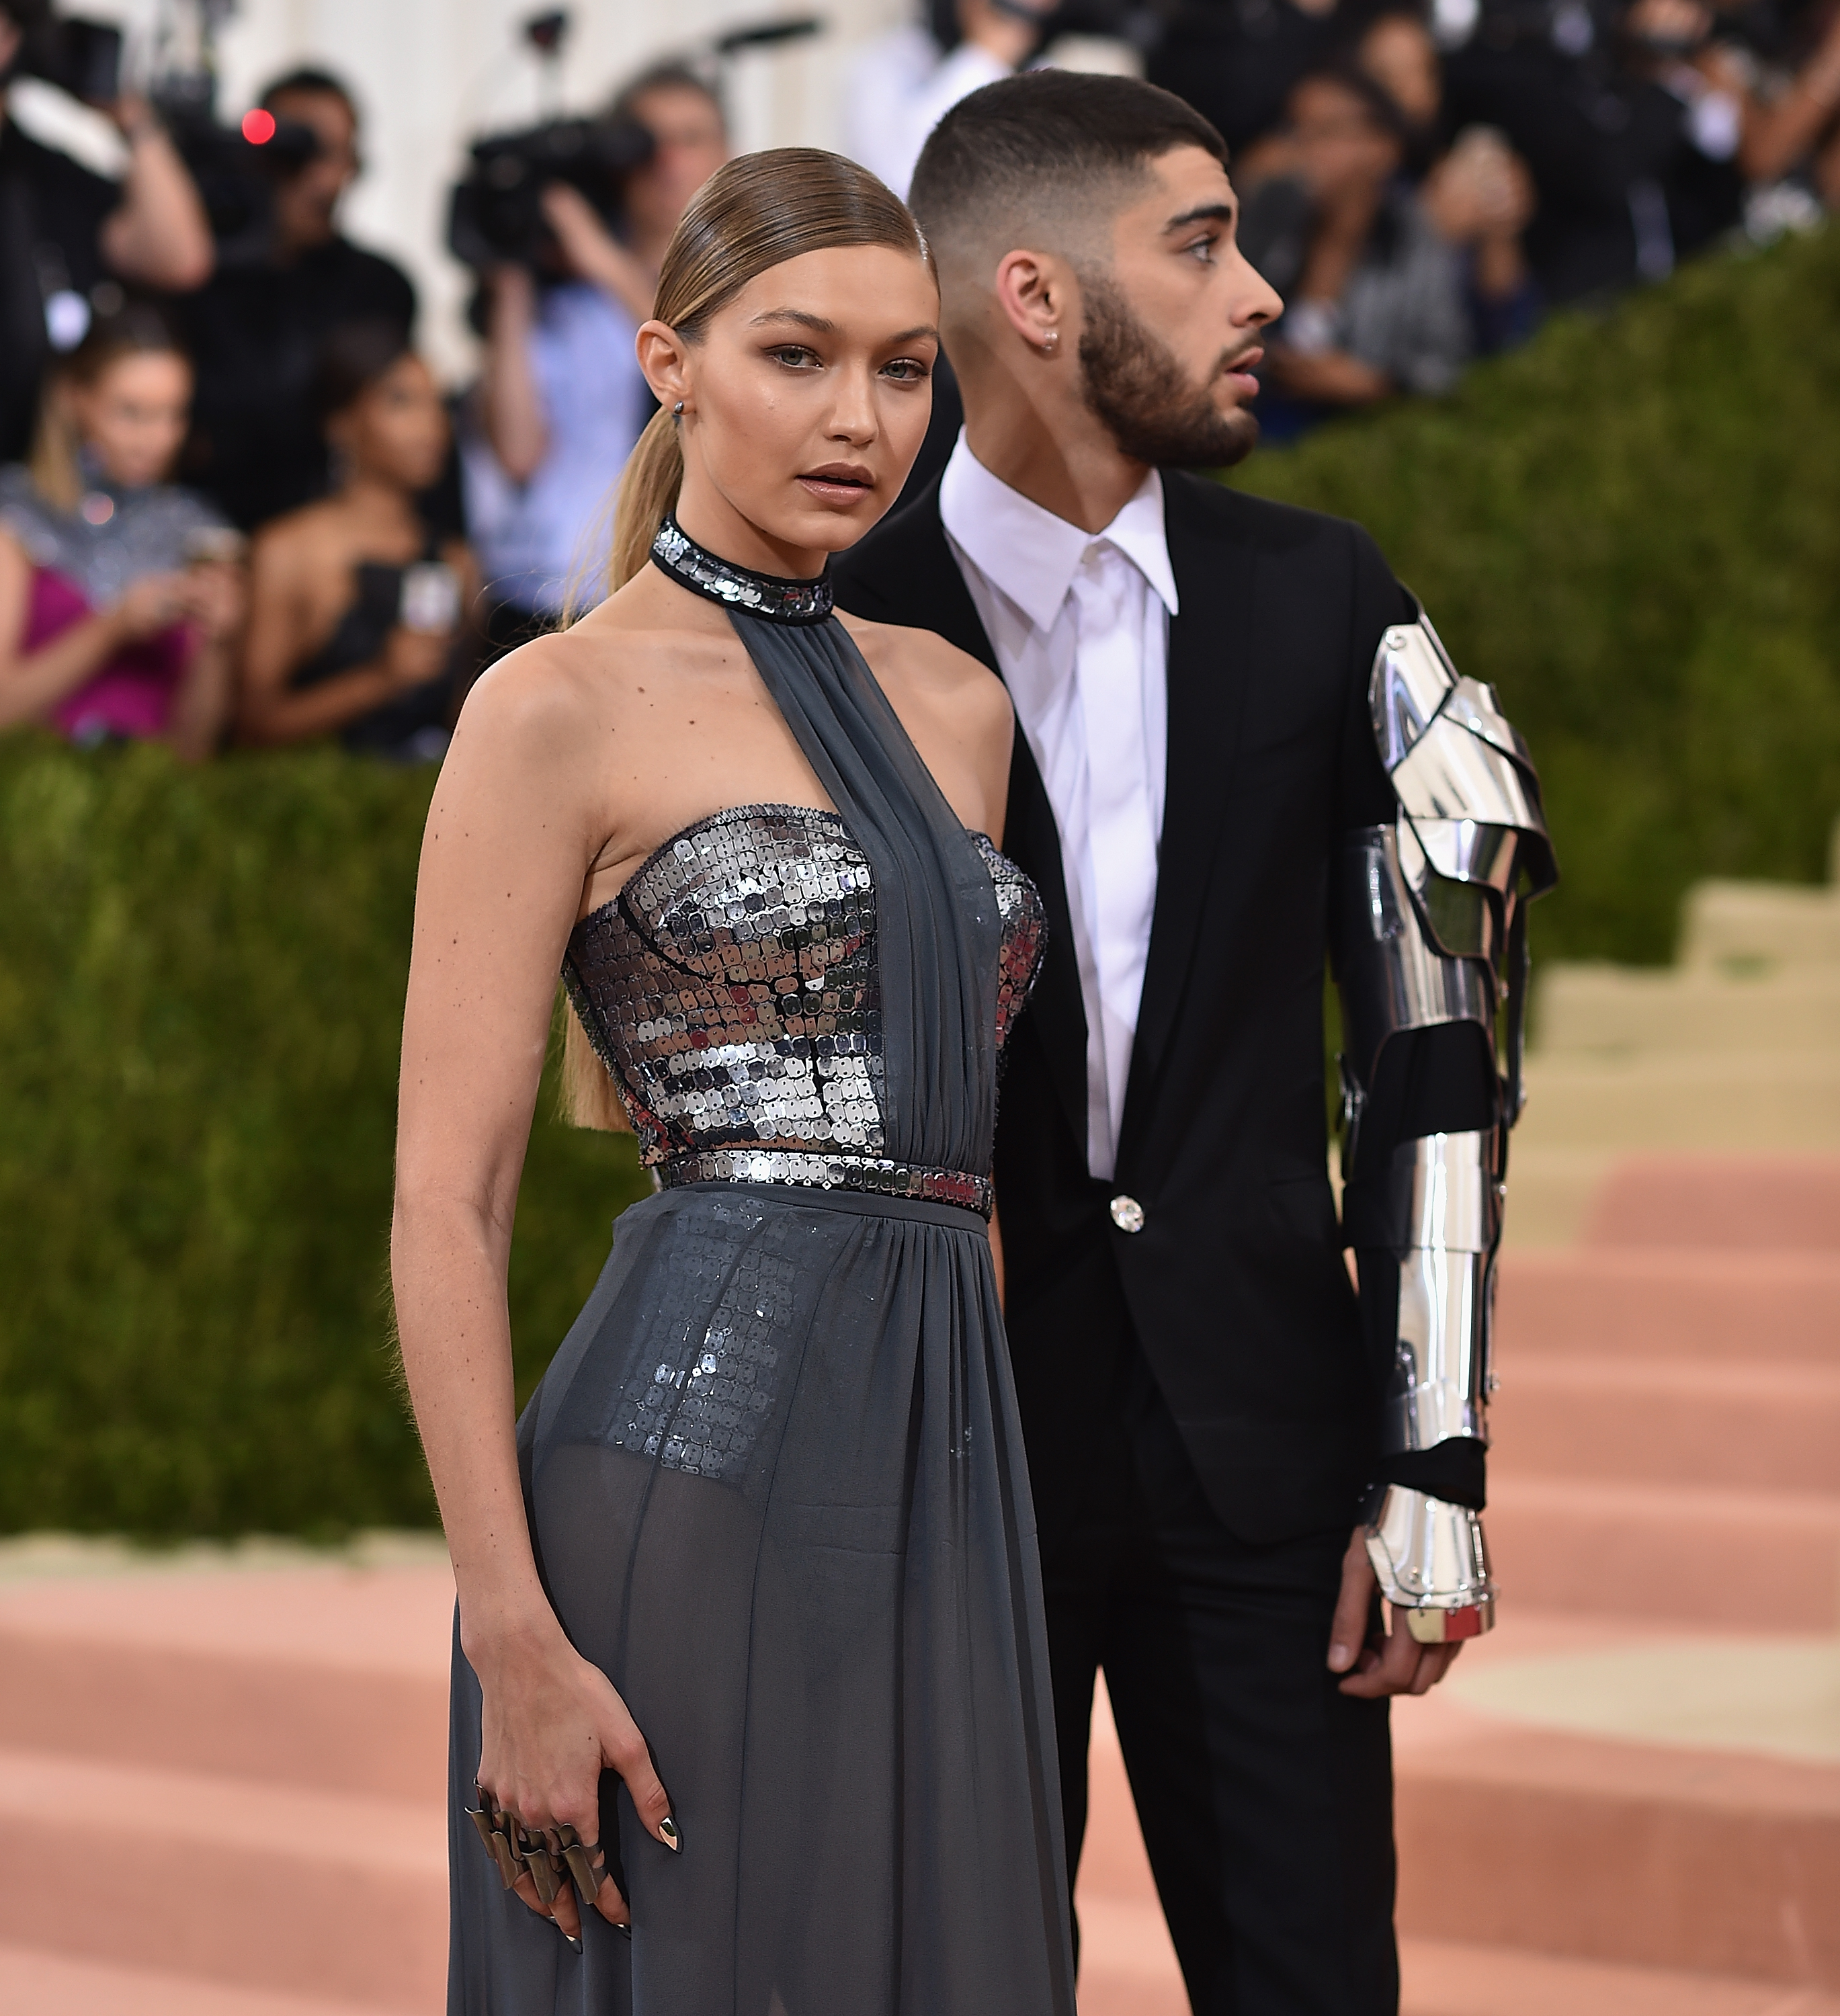 Zayn Malik Done With the Met Ball